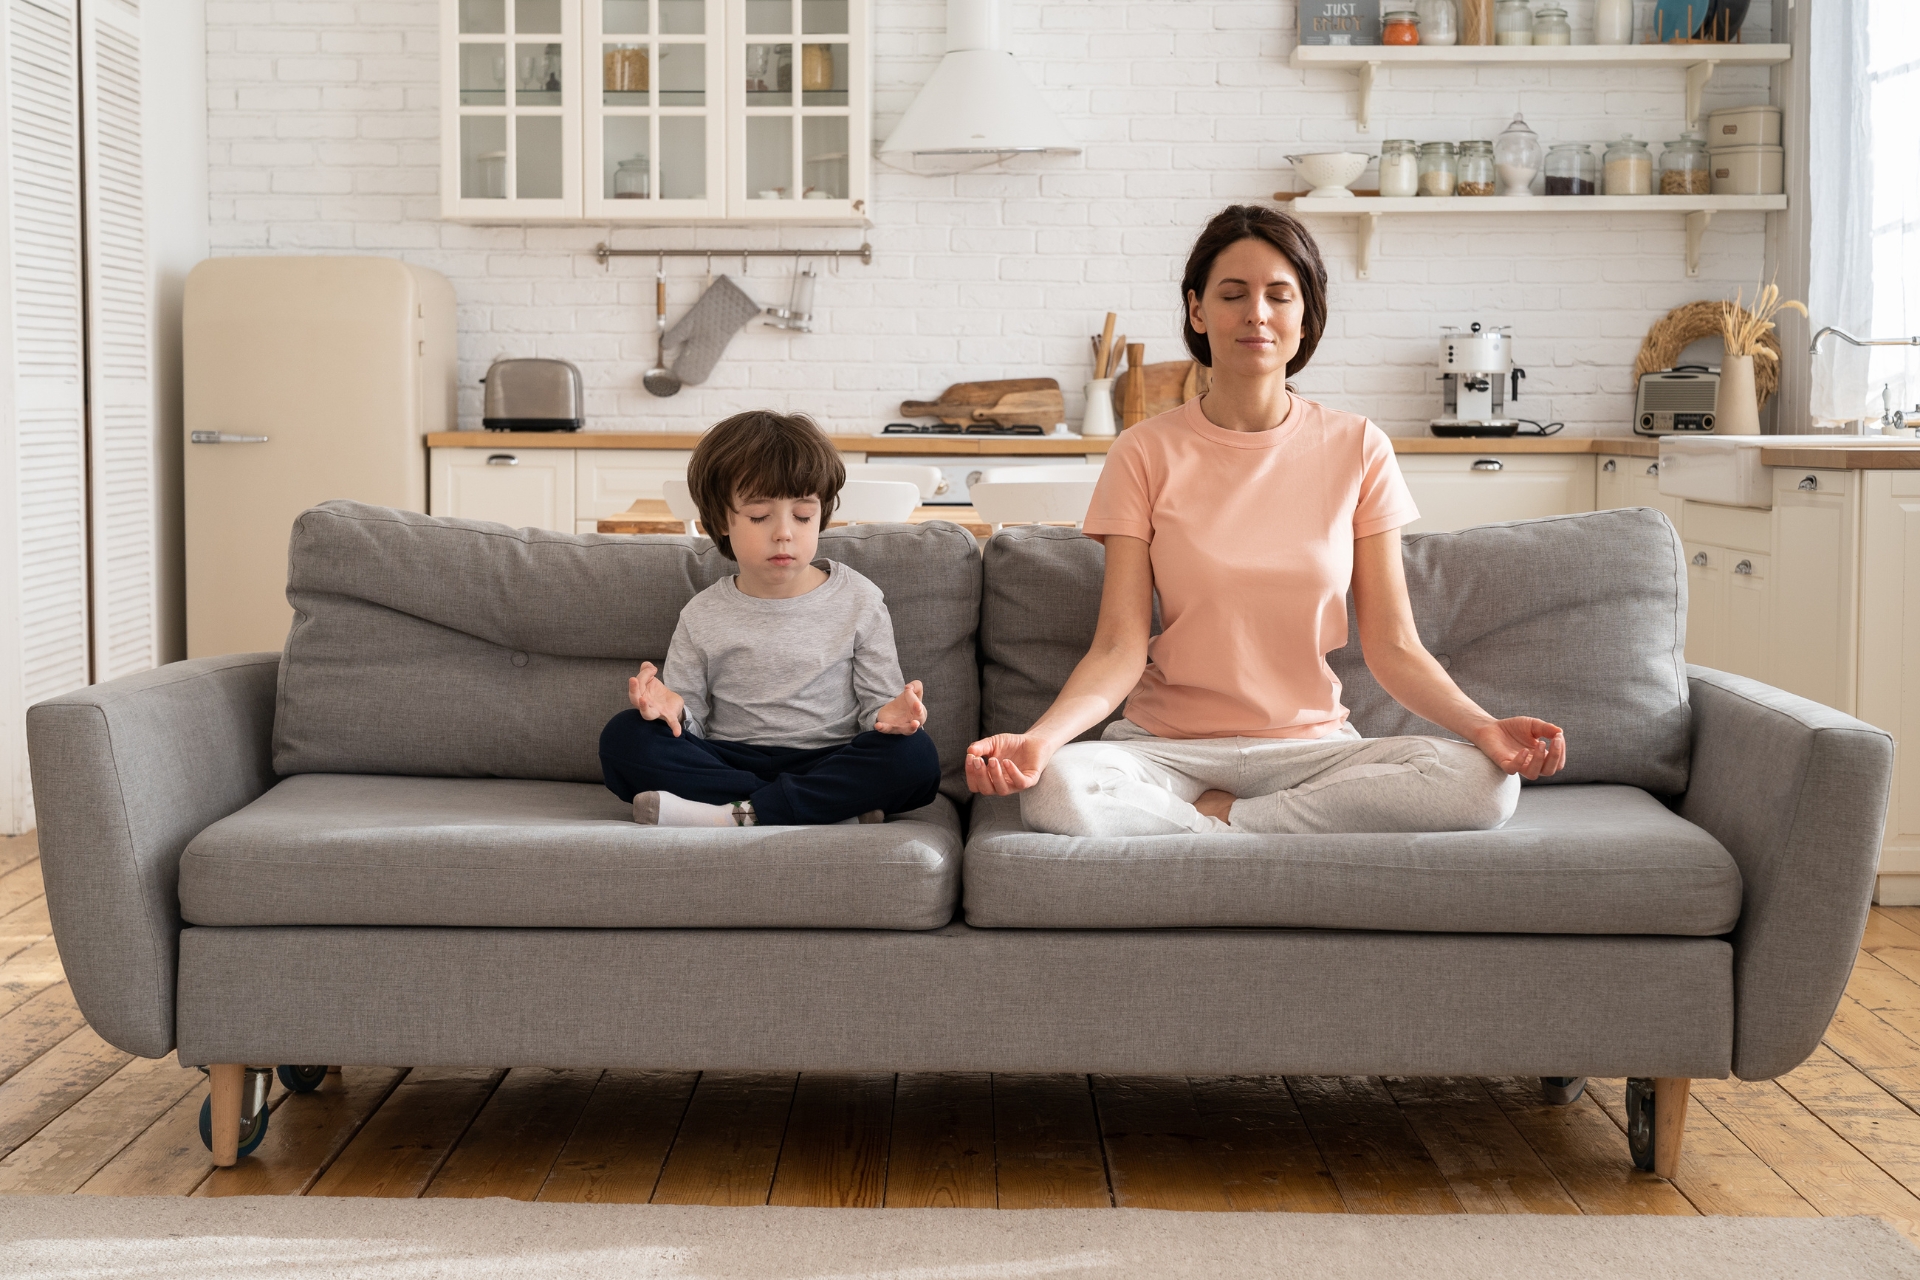 mom meditating with her son on the couch